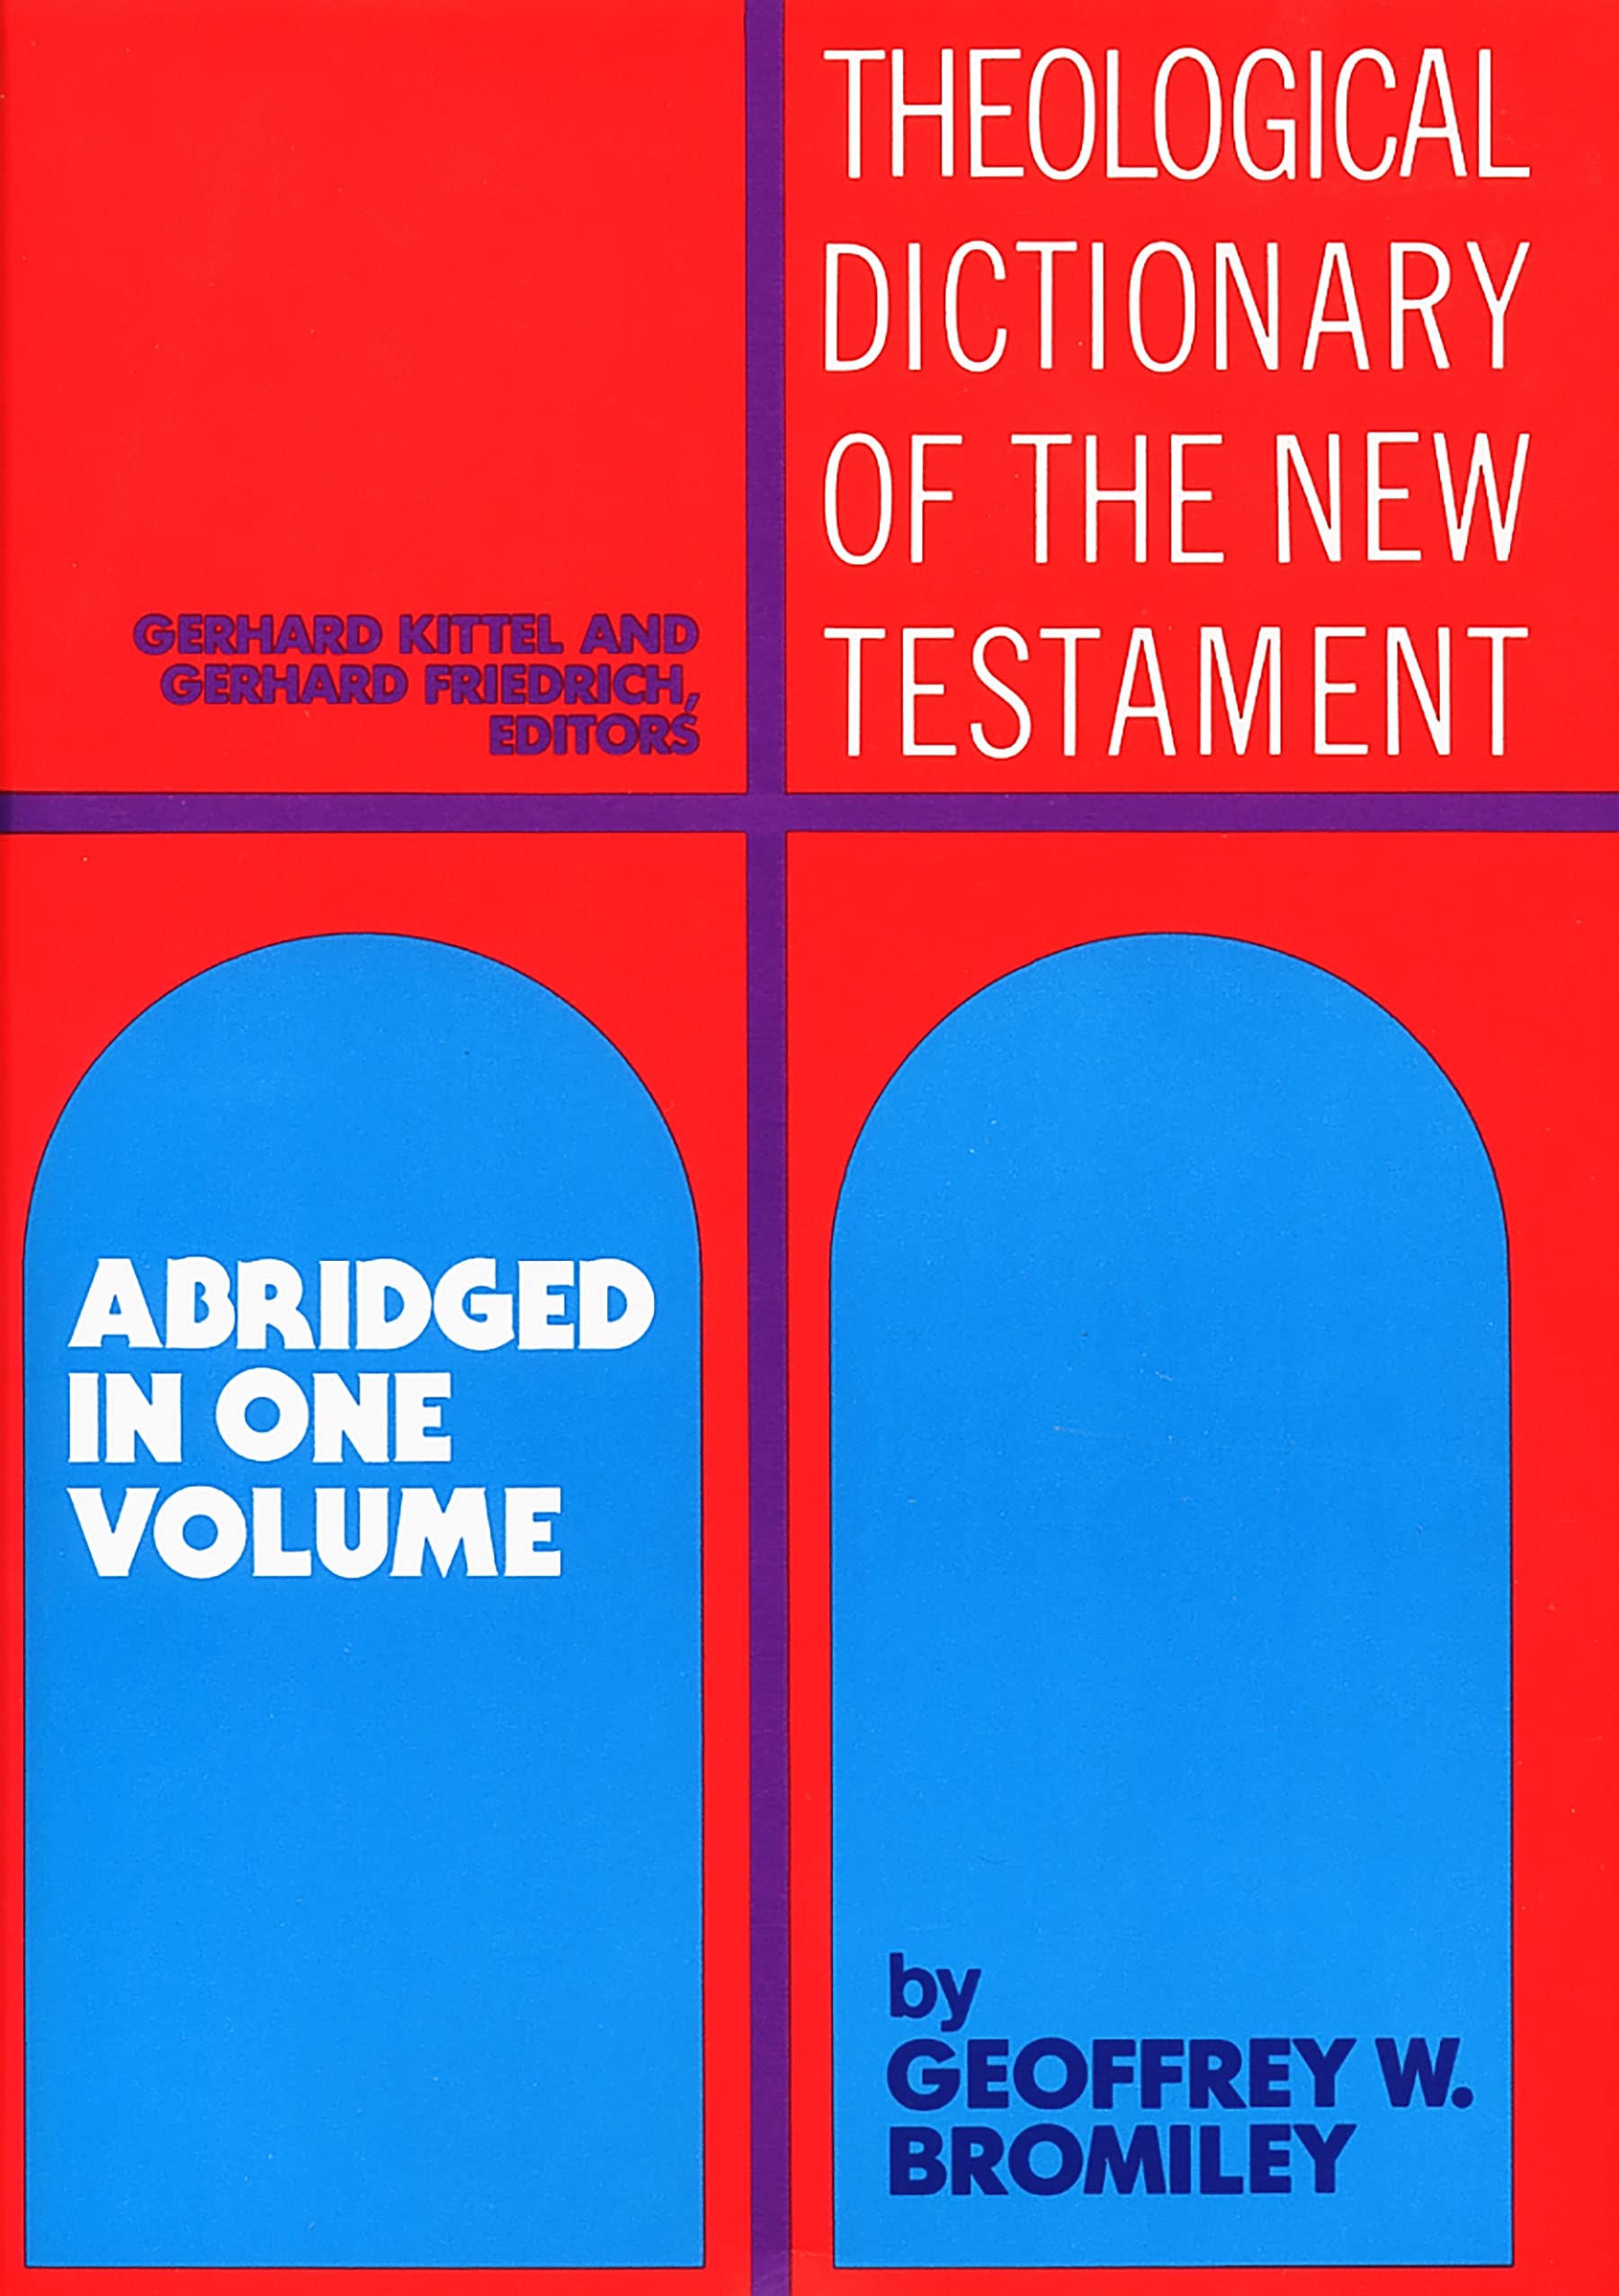 Theological Dictionary of the New Testament: Abridged in One